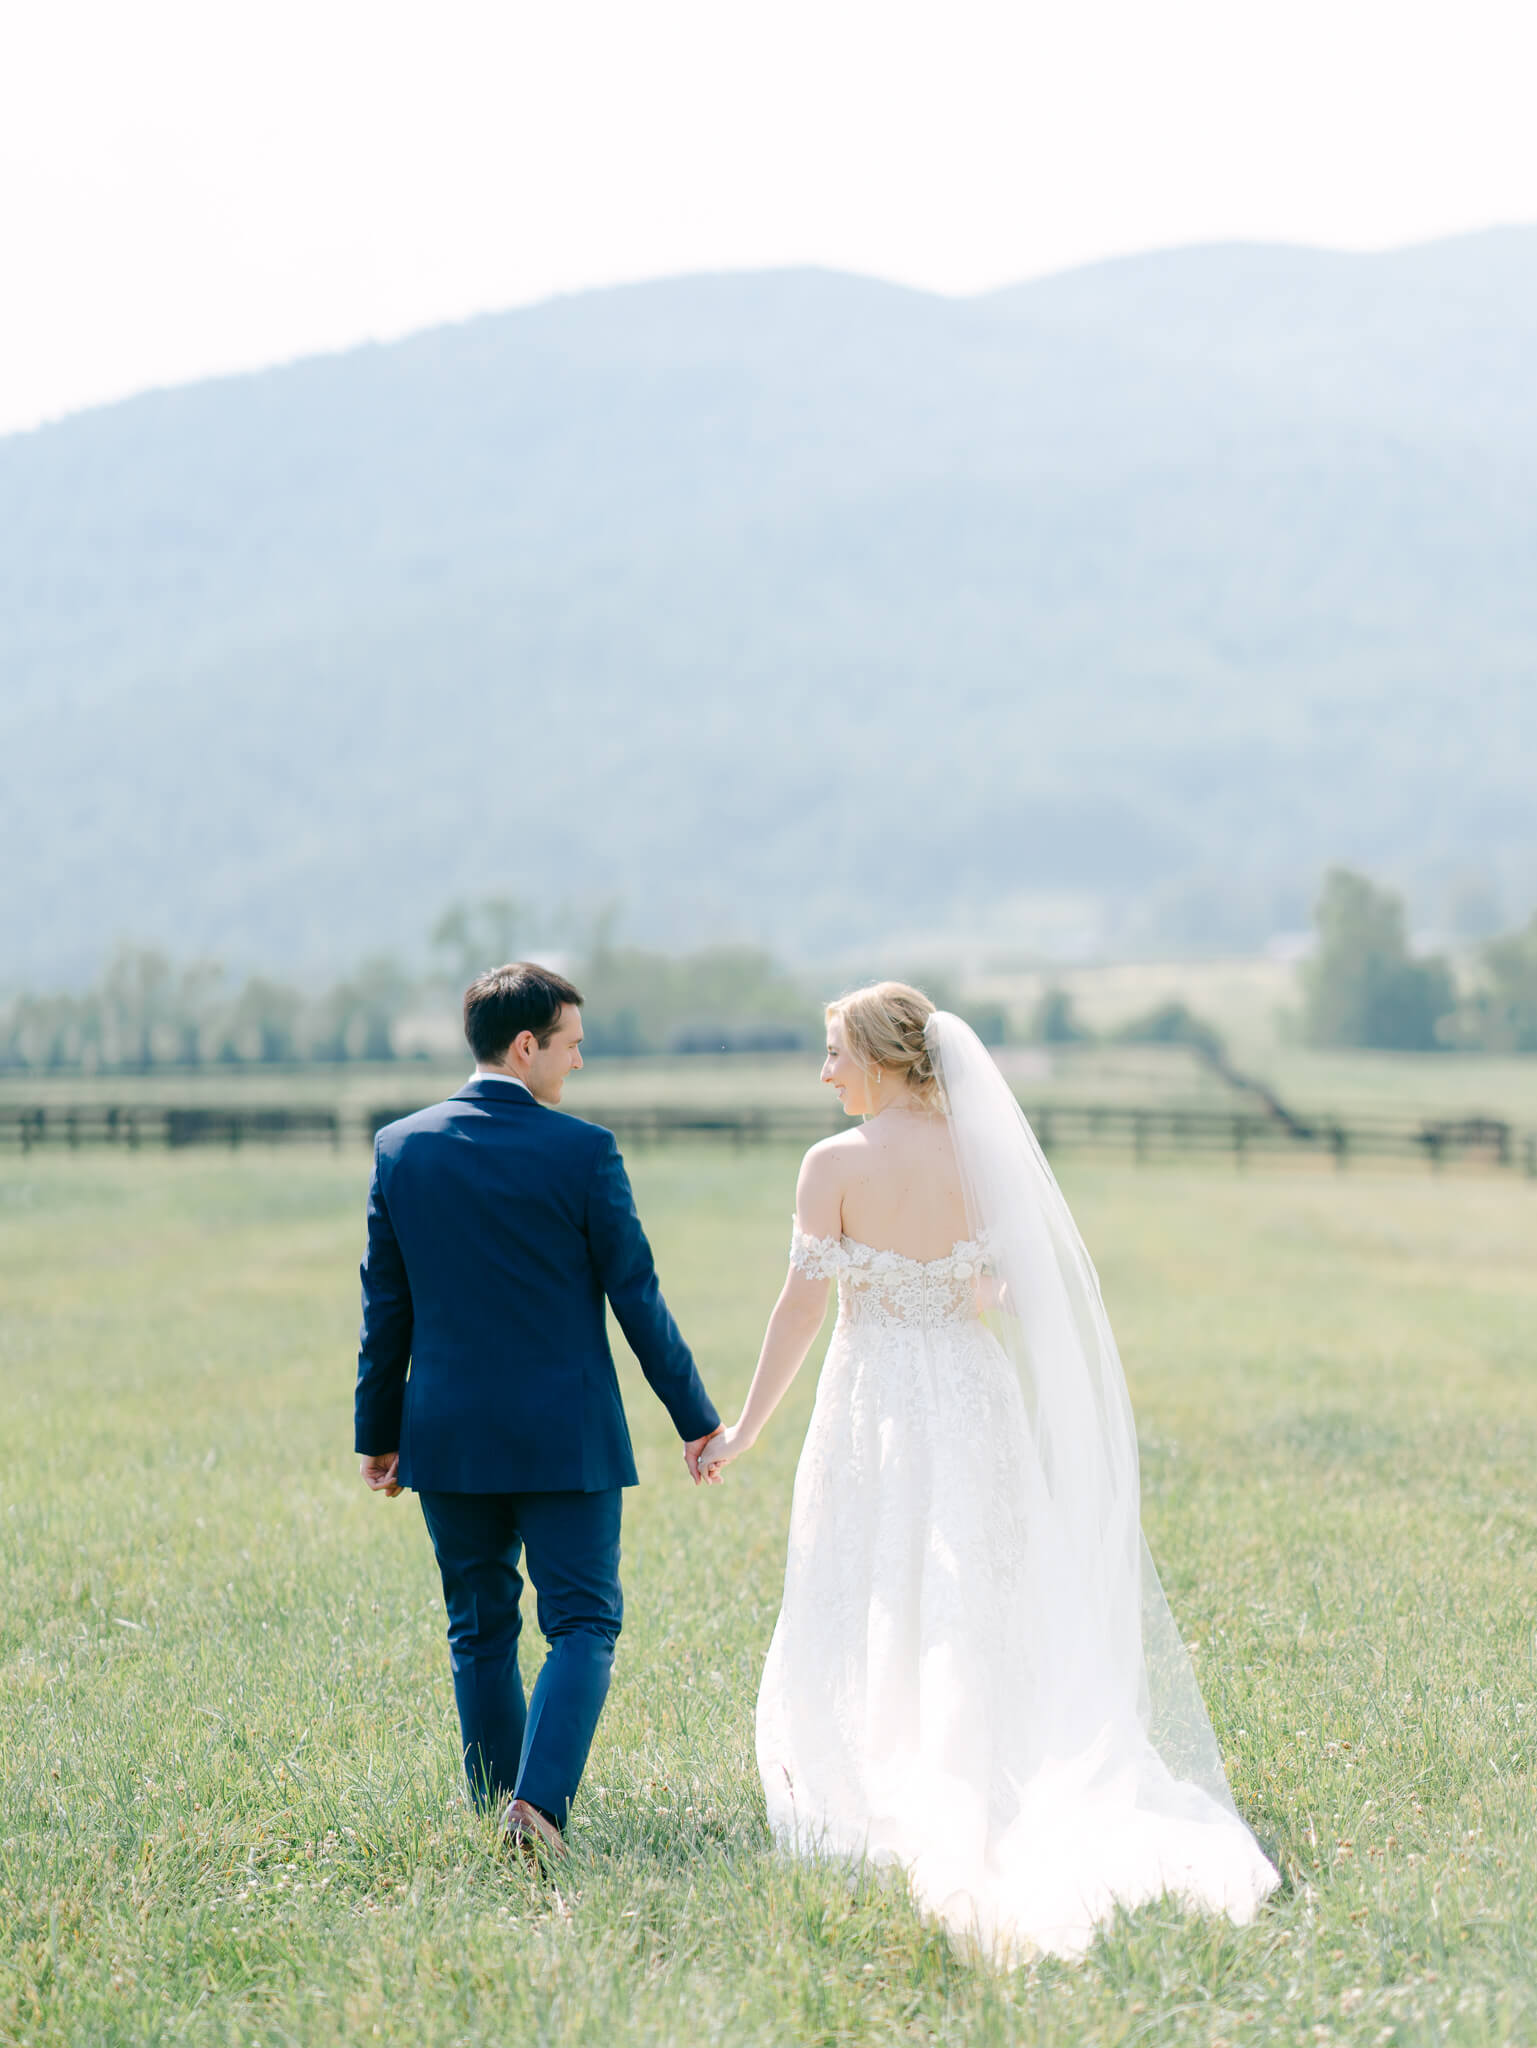 A bride and groom walking away hand in hand towards the Southern Virginia mountains.